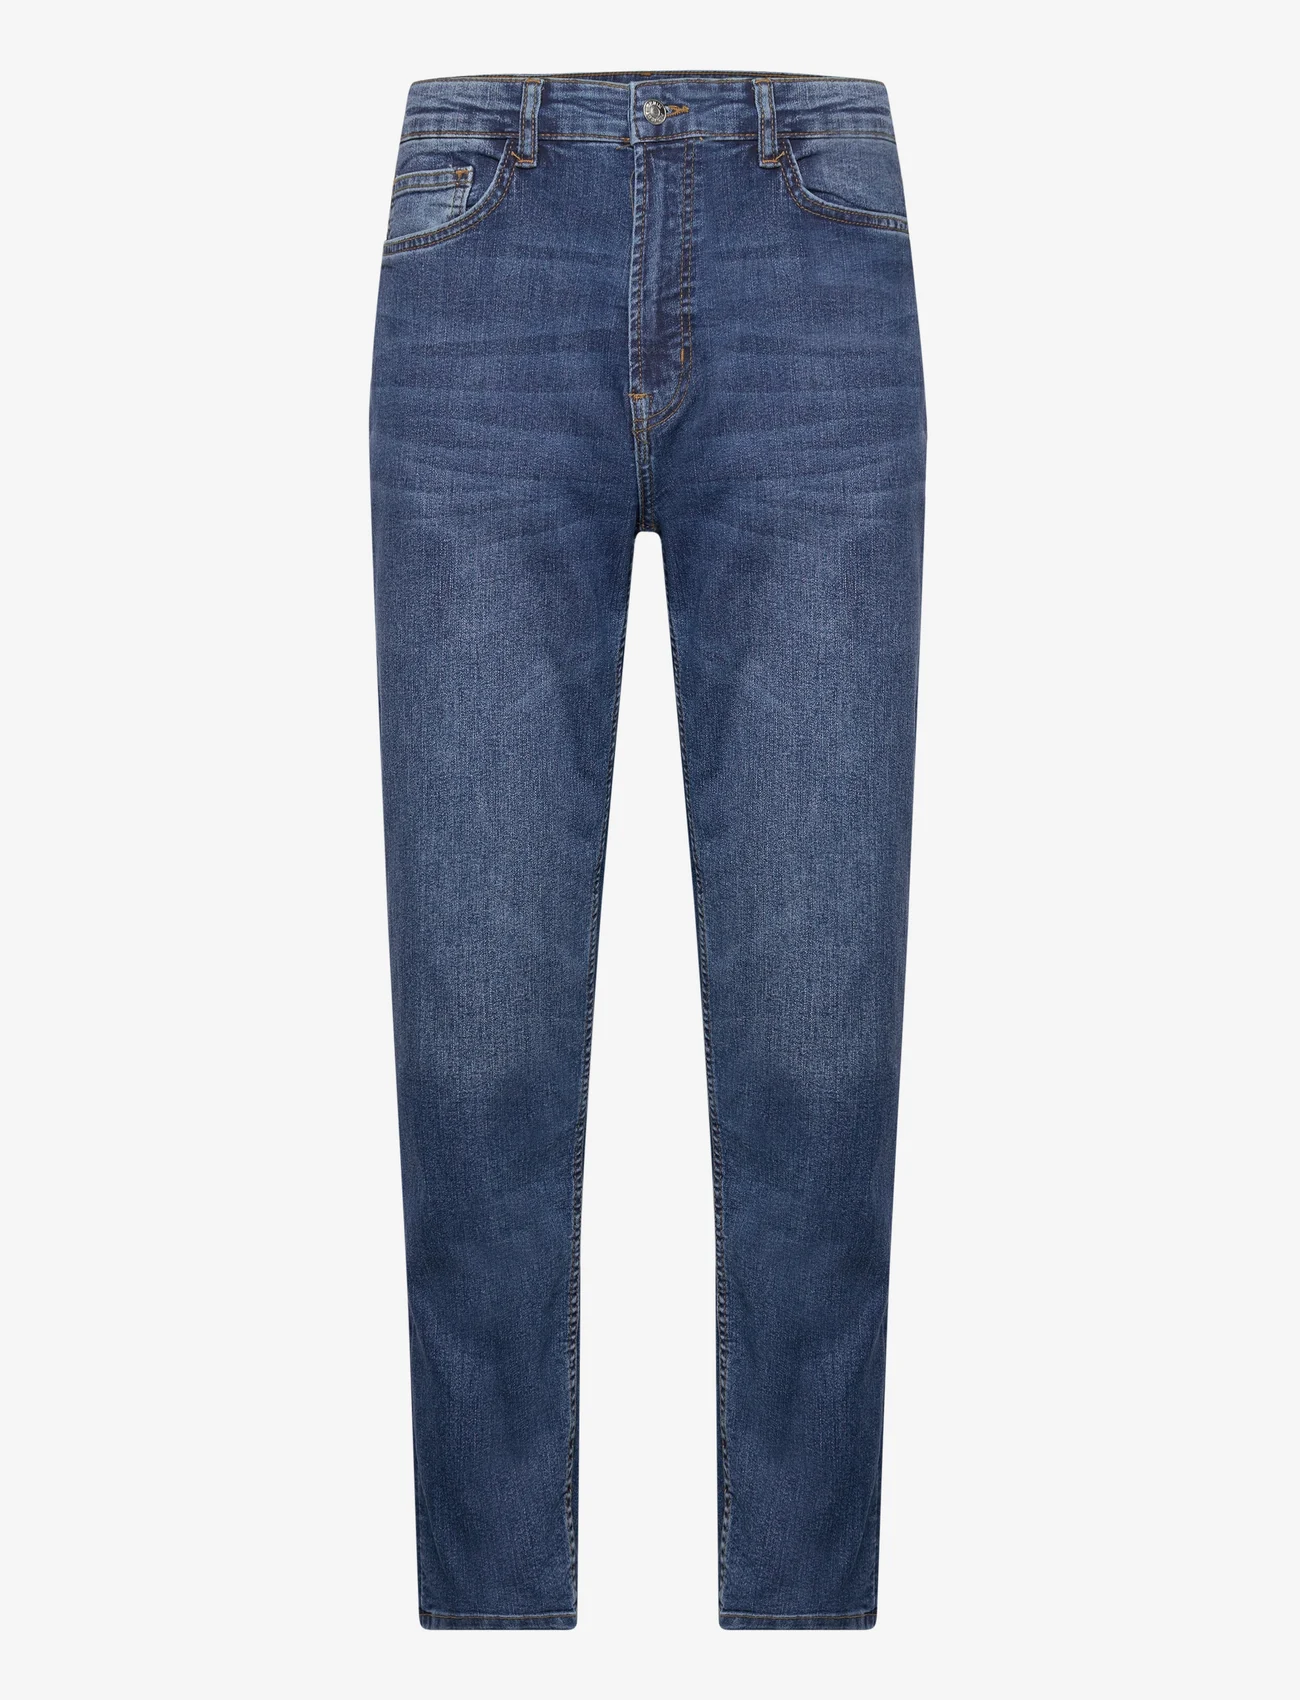 Denim project - DPRECYCLED CARROT JEANS - tapered jeans - medium stone wash - 0